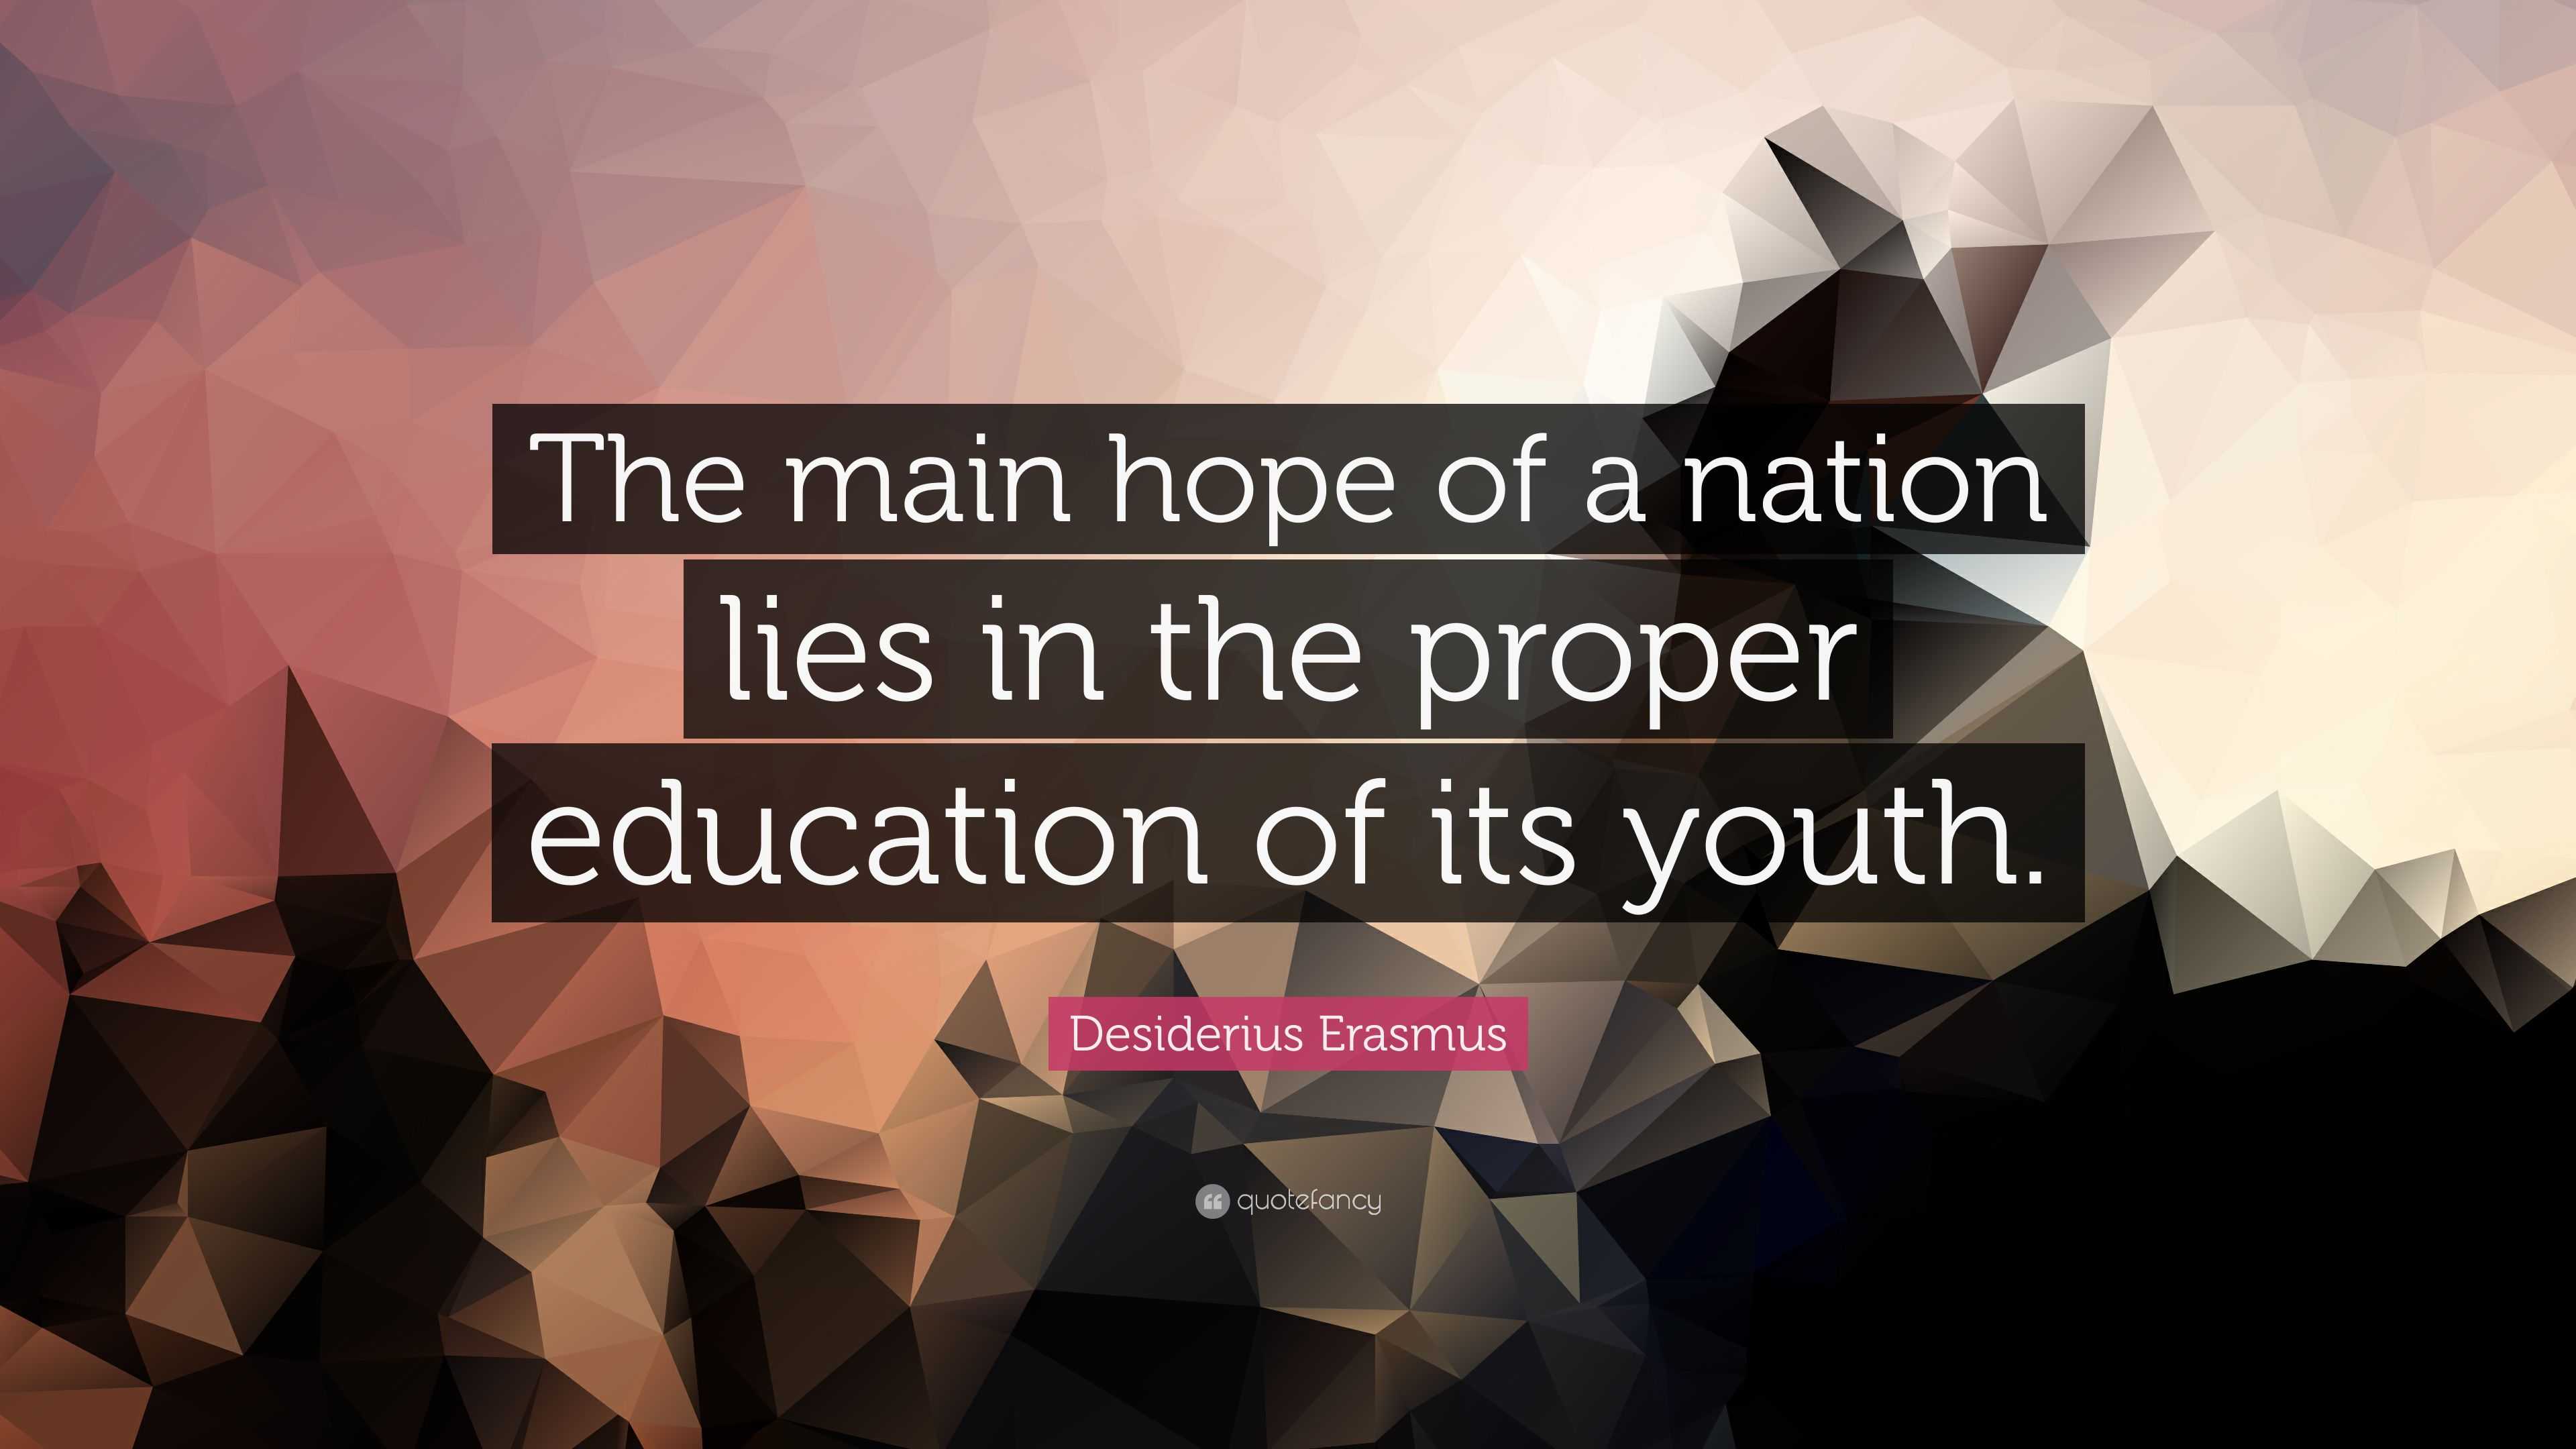 Desiderius Erasmus Quote: “The main hope of a nation lies in the proper